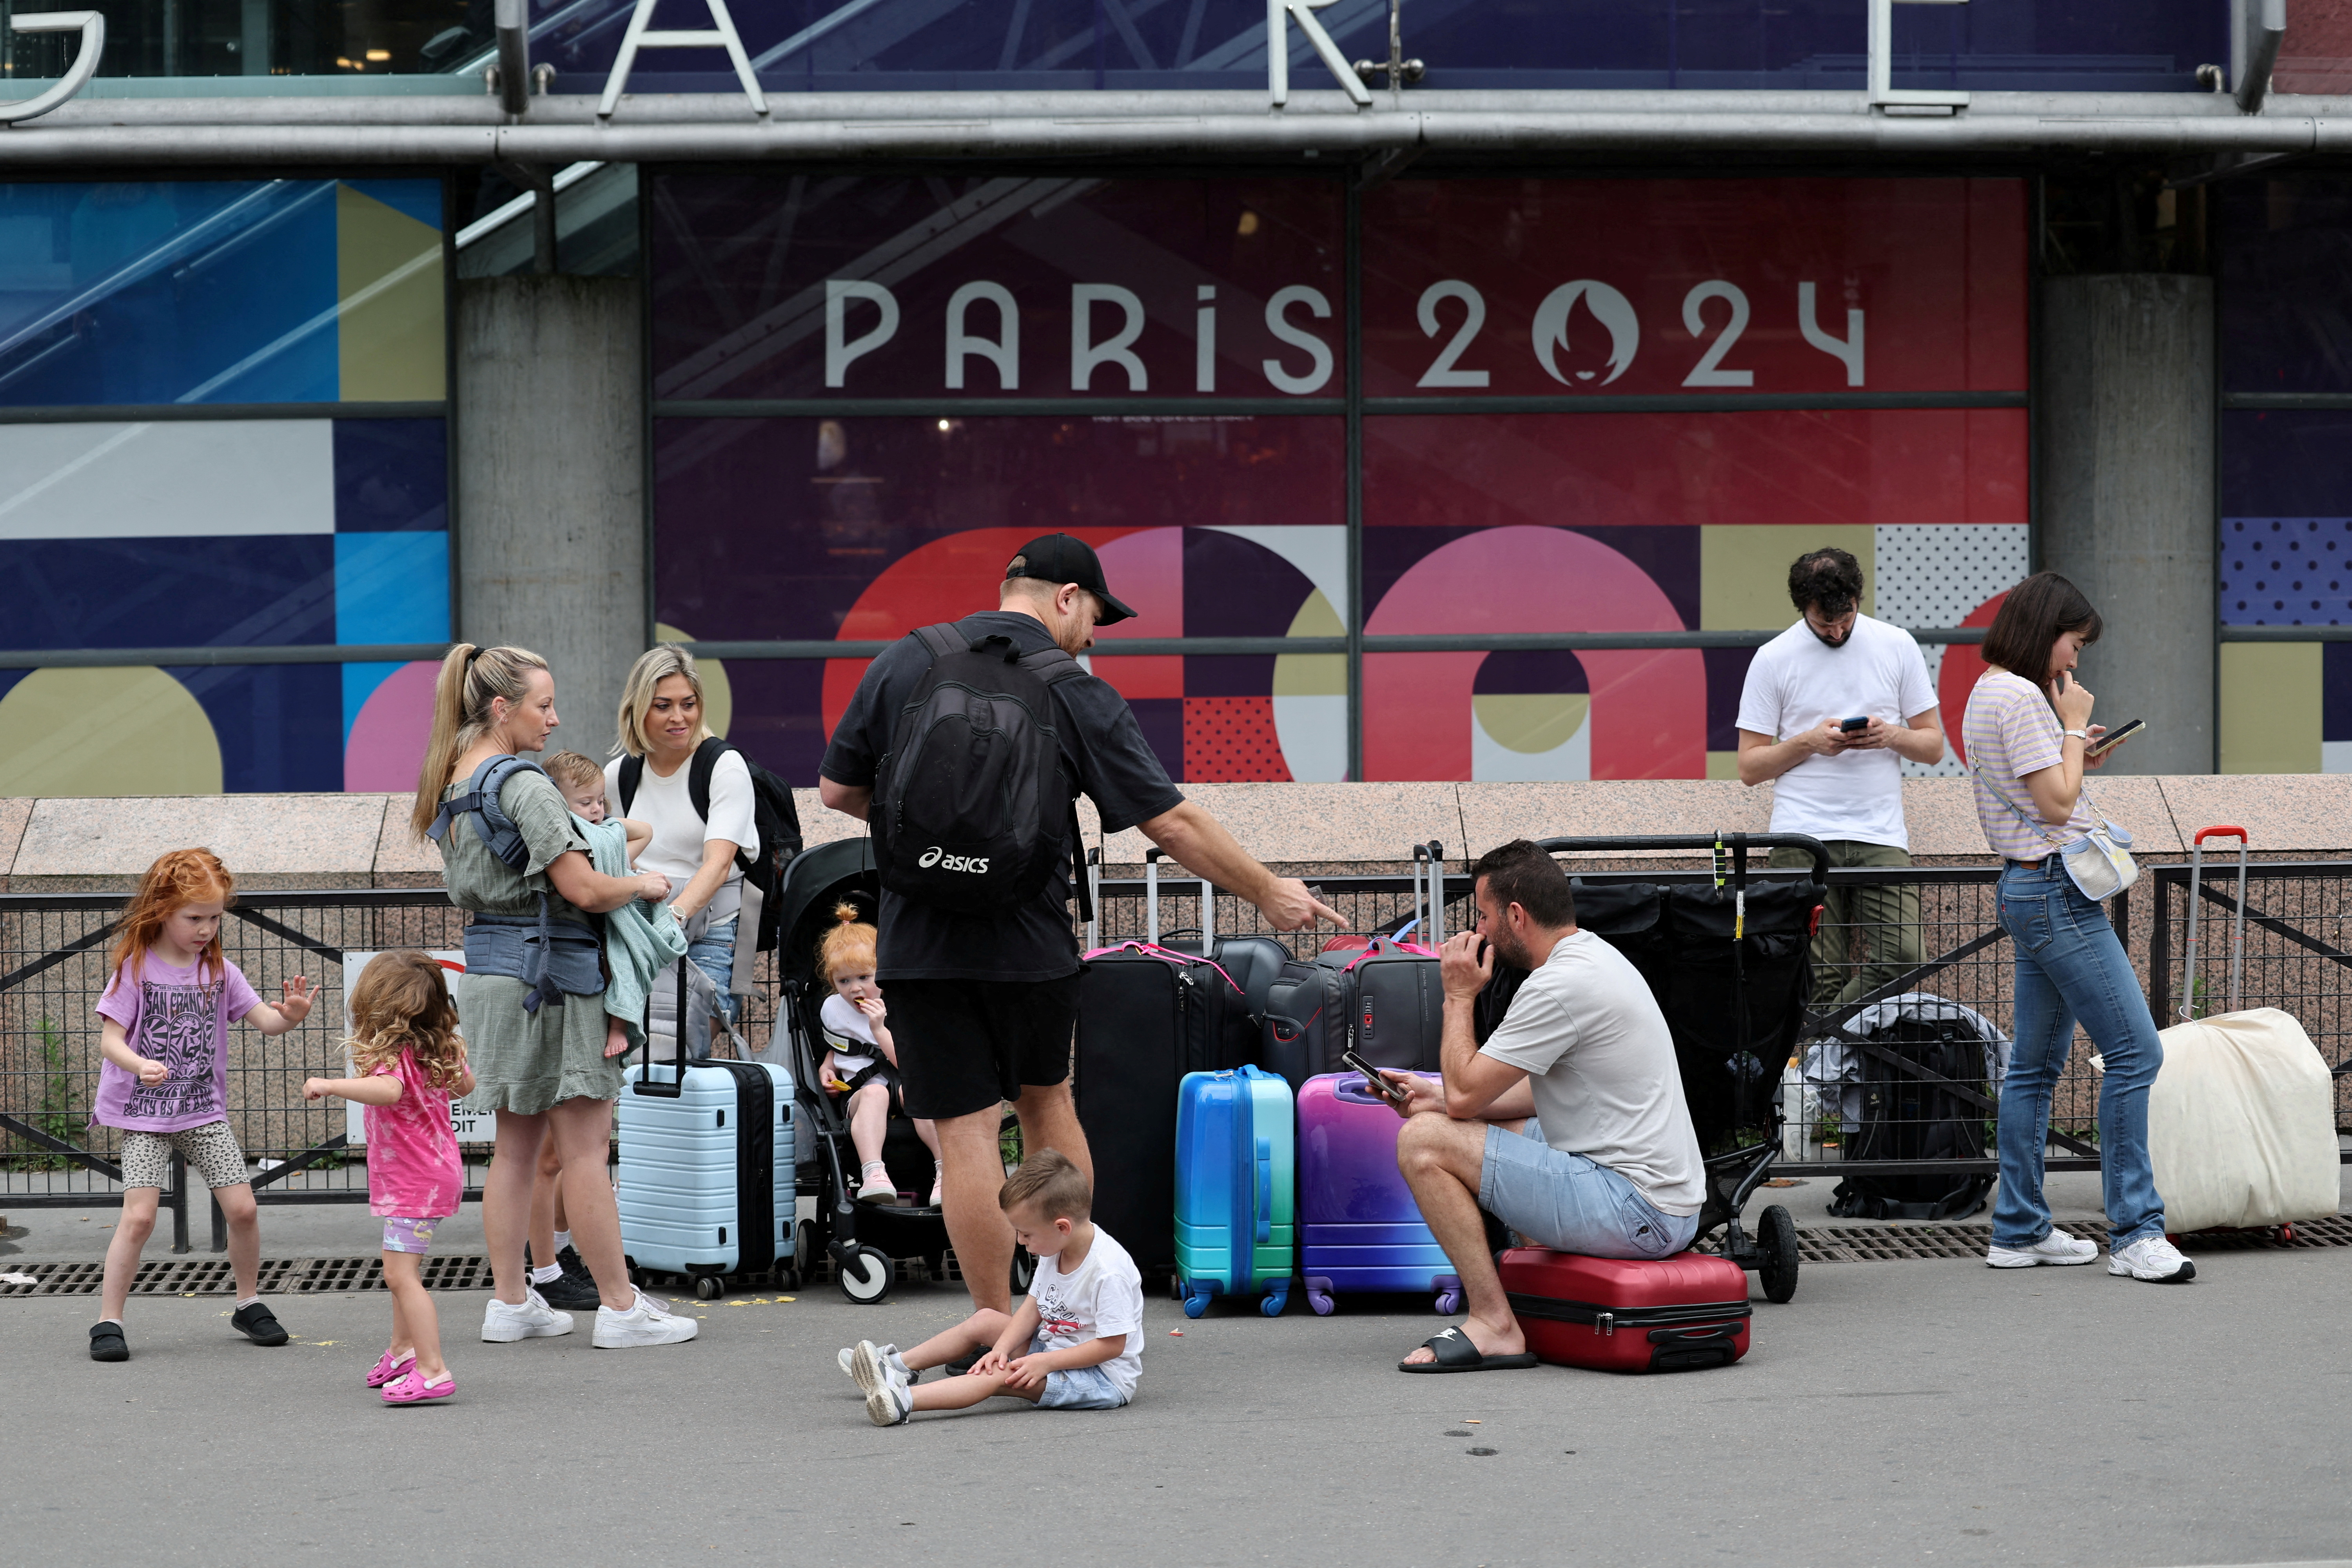 Arsonists attack French railways ahead of Paris 2024 Olympics opening ceremony